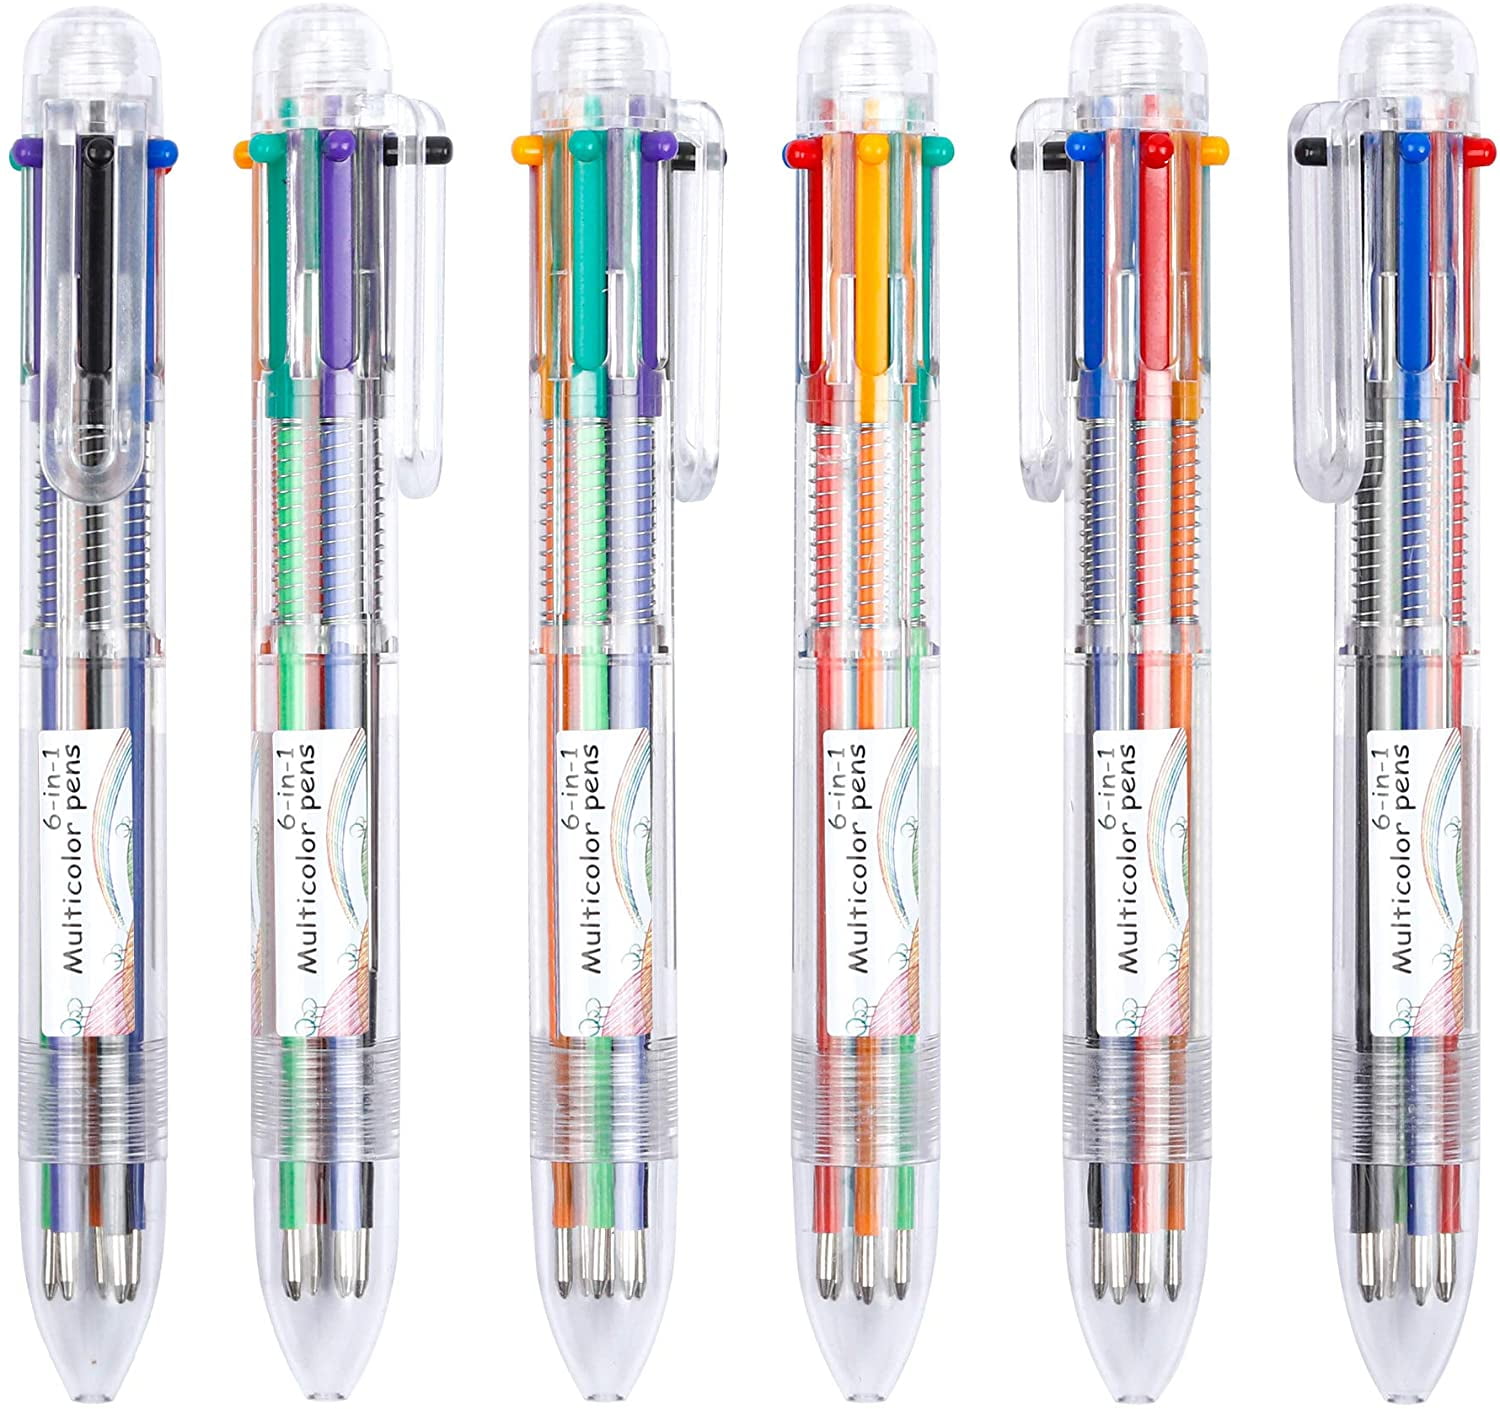 Doctor Who Jumbo 10 Multi Colours Ball Point Pen All in One Pencil Kids Gift 